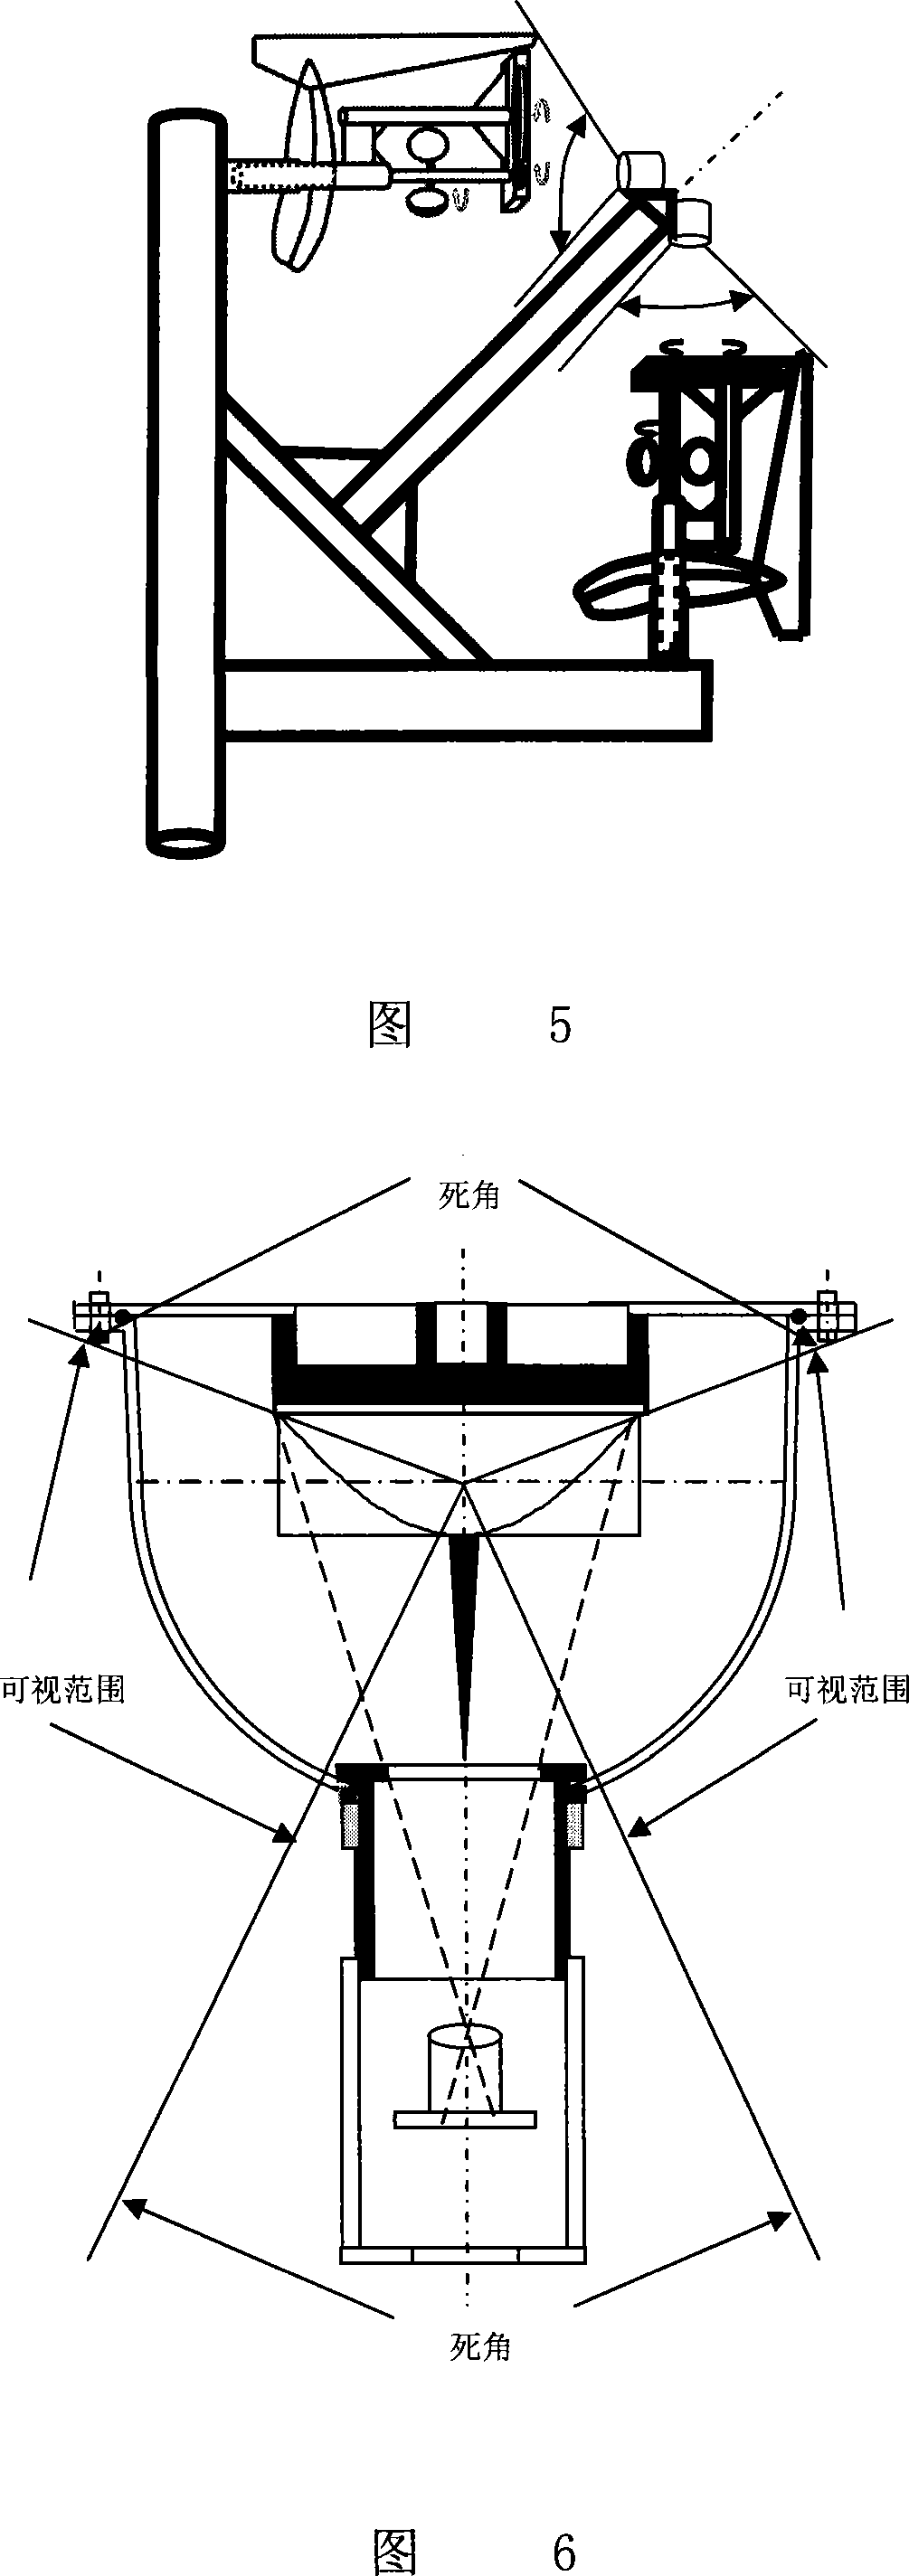 Tri-dimensional wind speed wind direction measuring apparatus based on omnidirectional vision